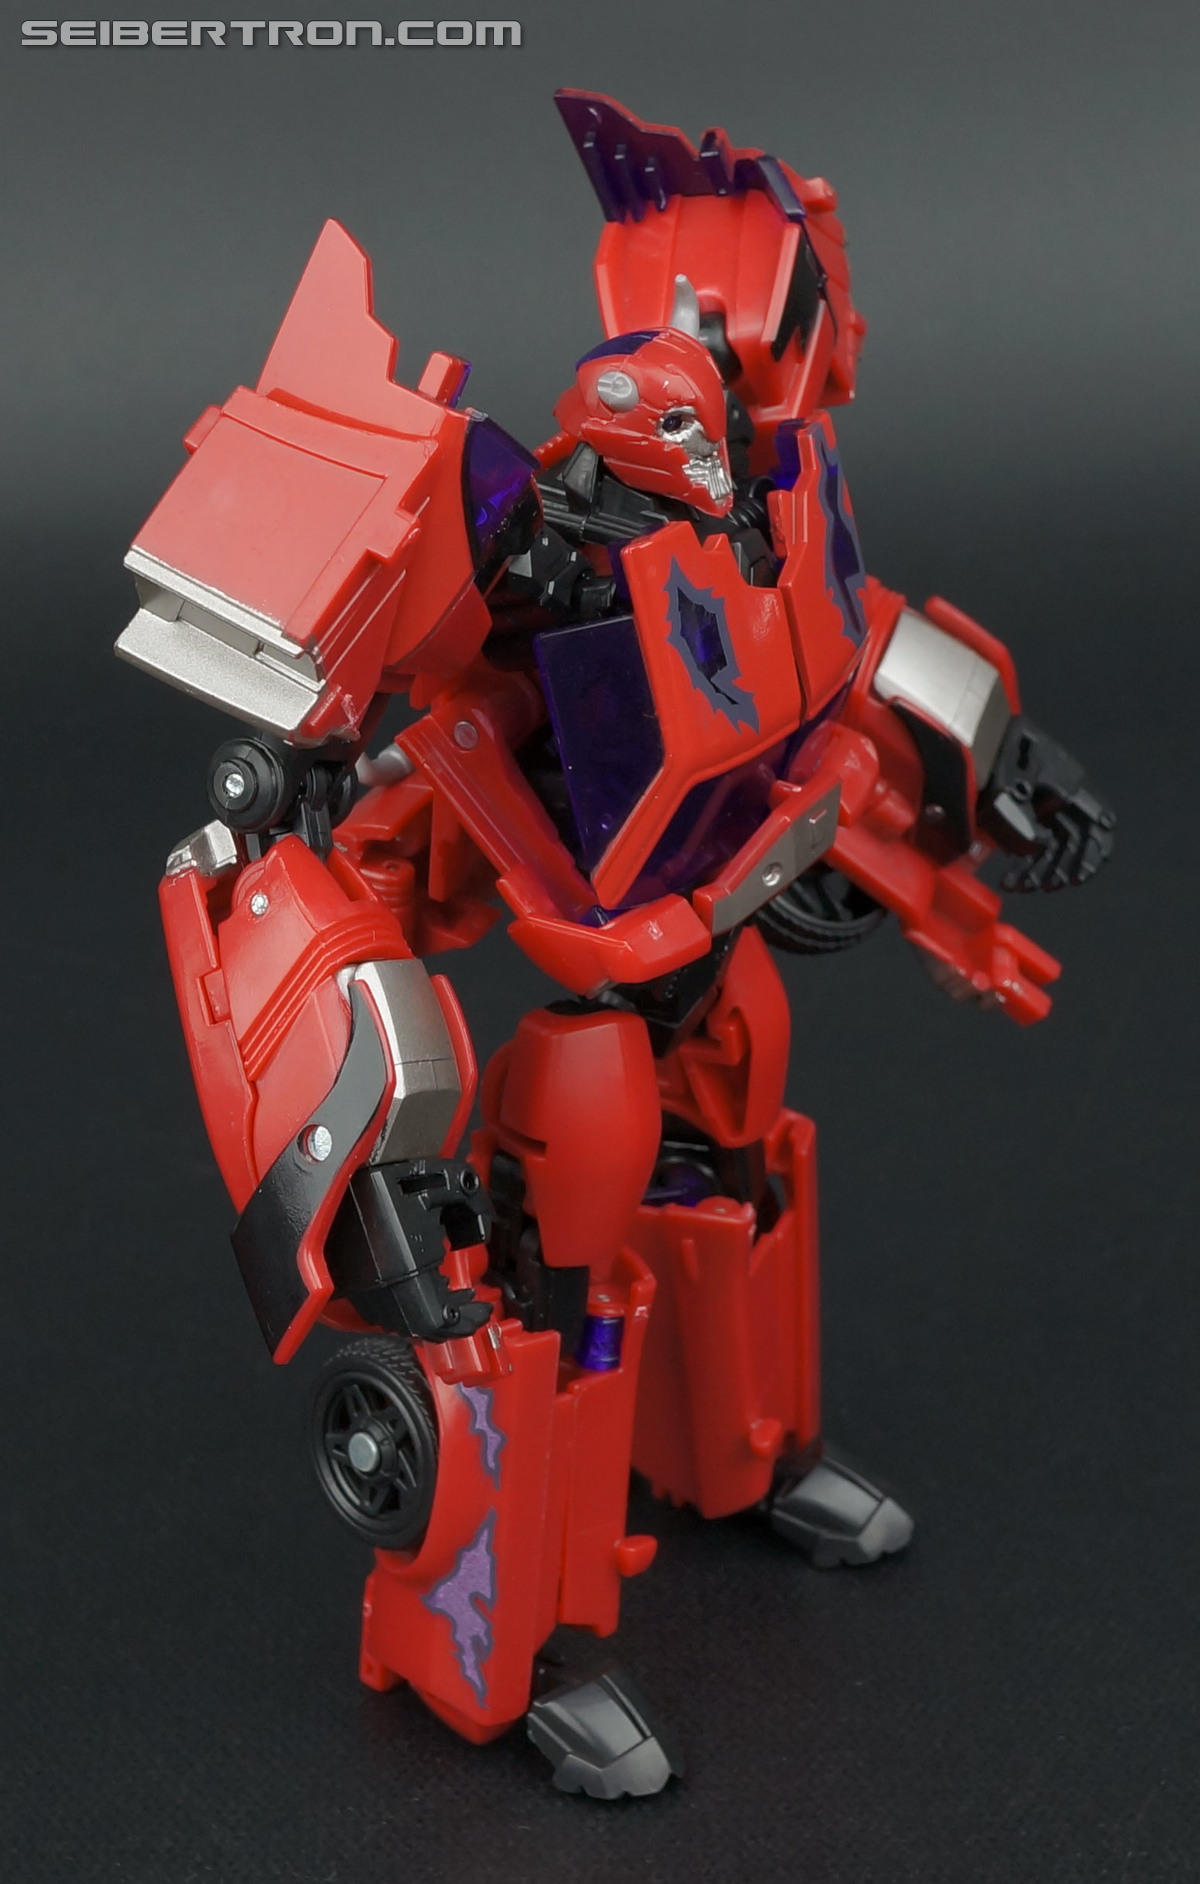 Transformers Prime: First Edition Terrorcon Cliffjumper (Image #73 of 179)